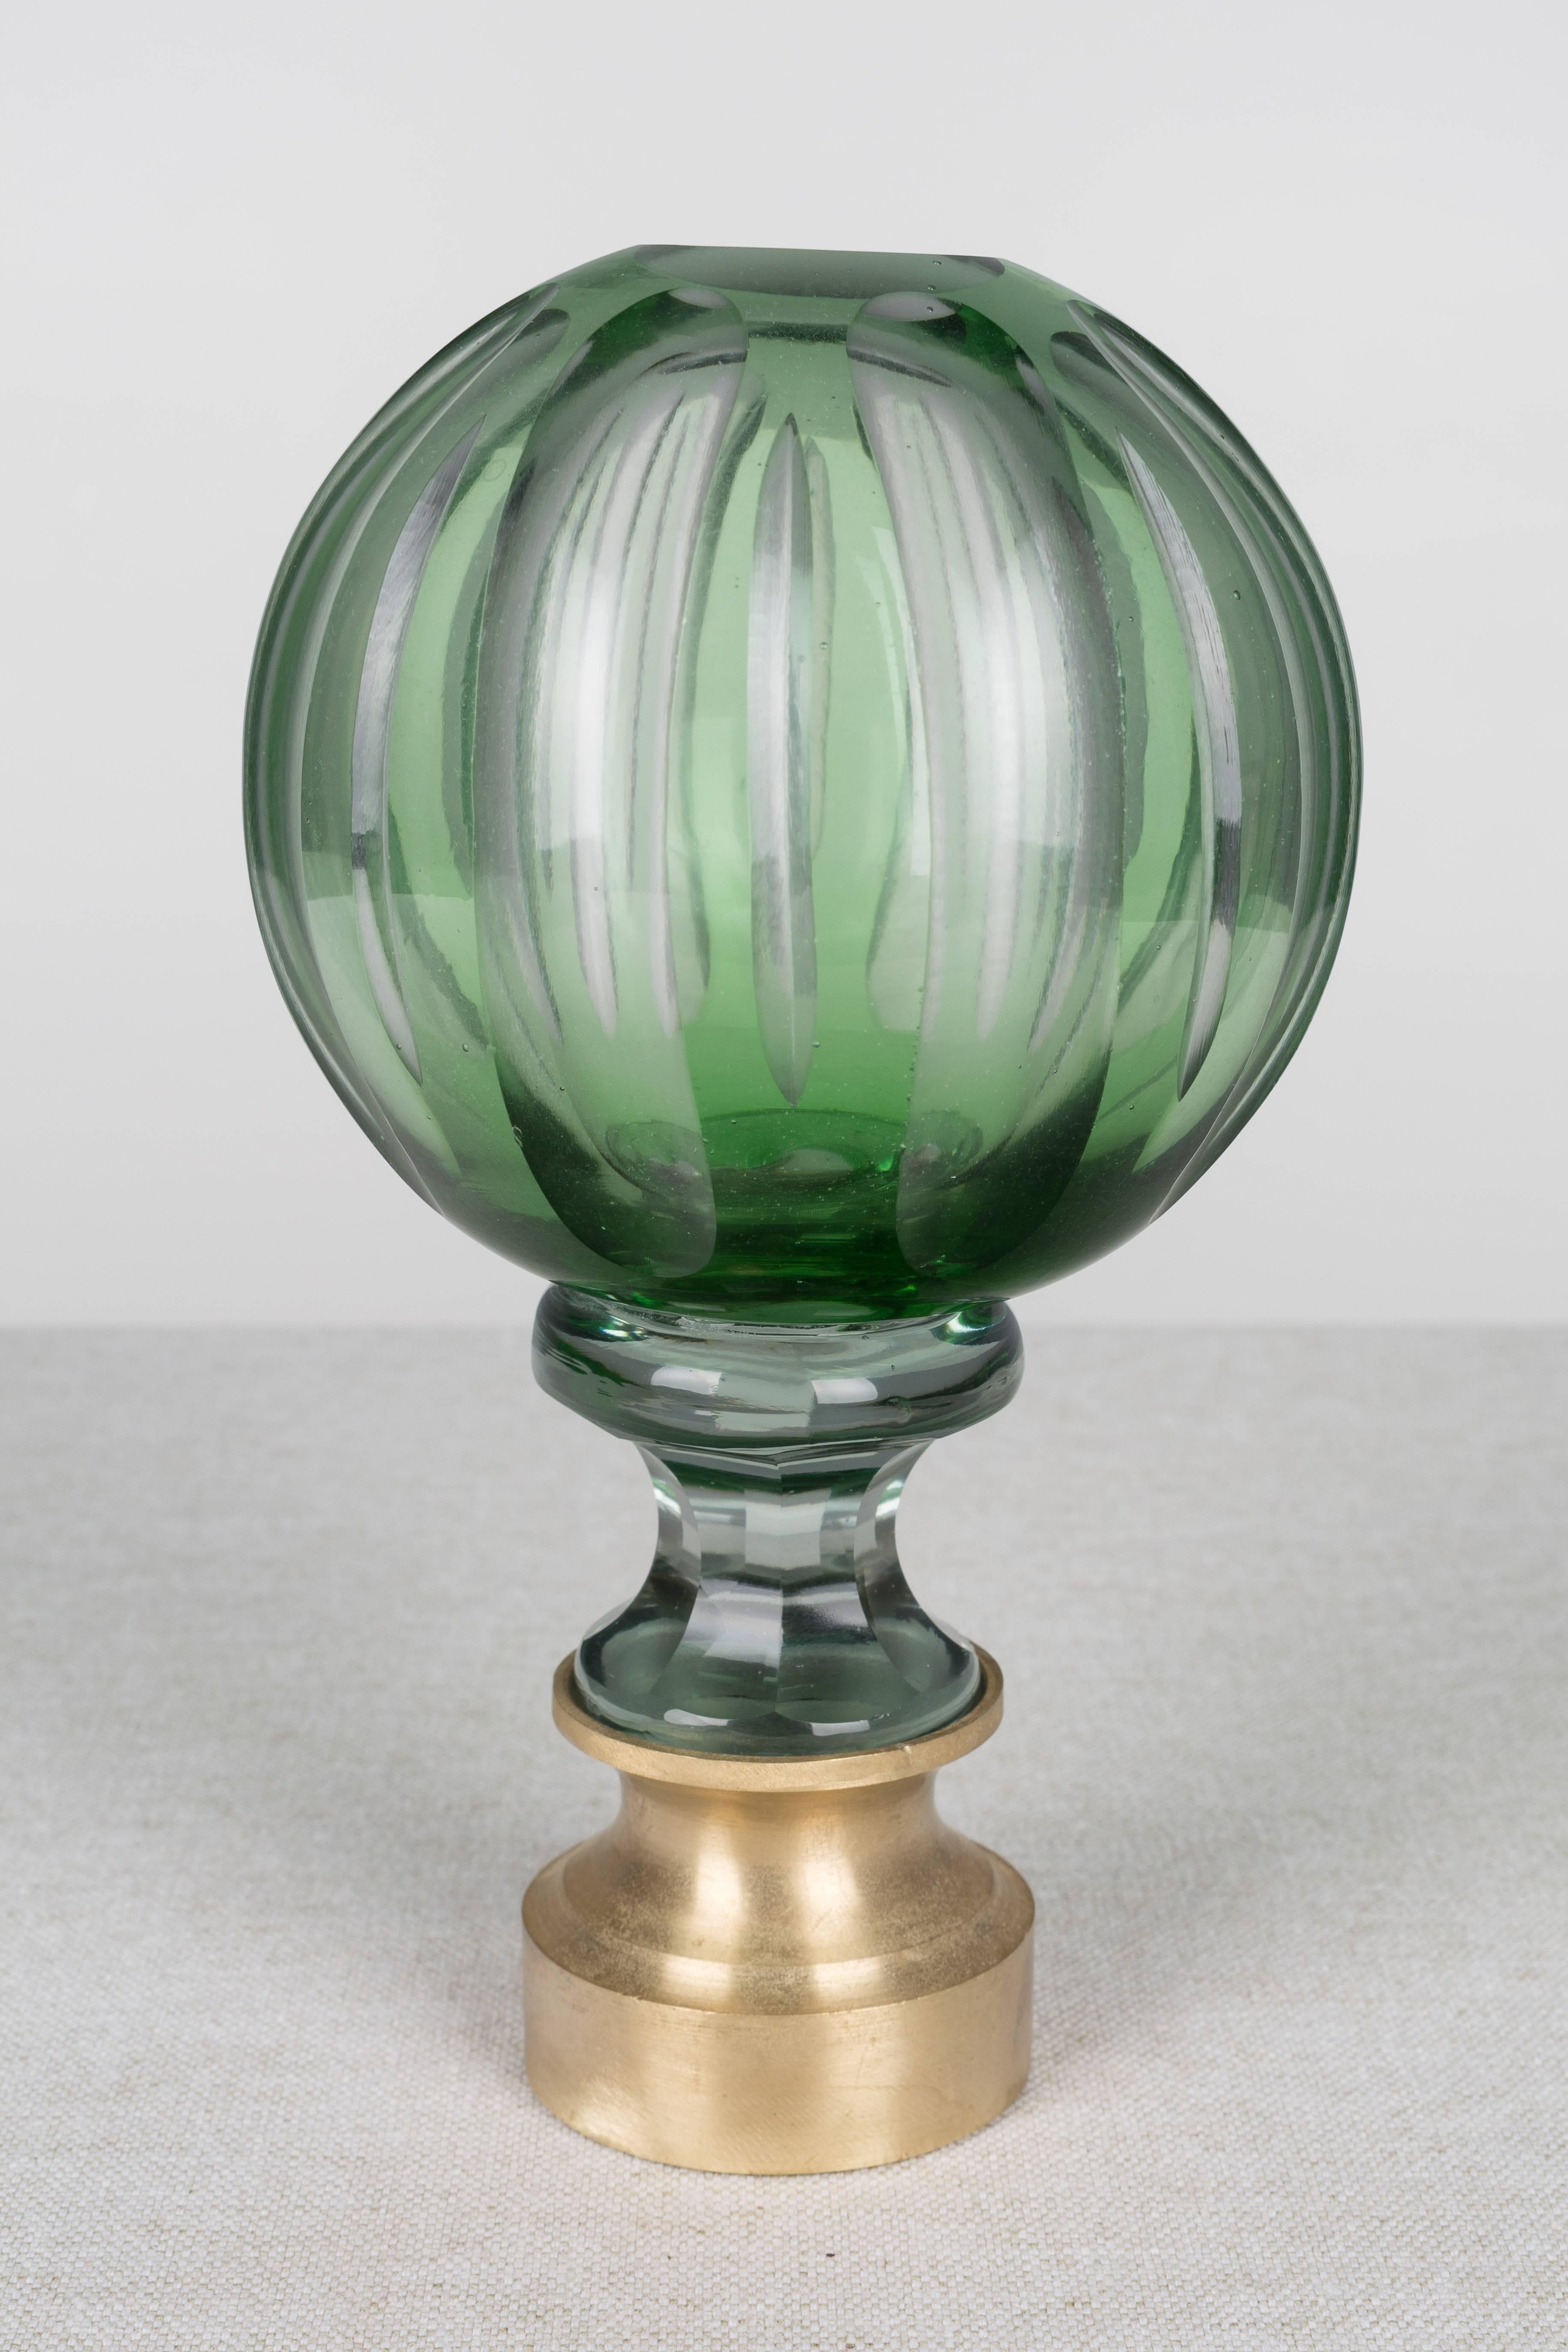 Cast 19th Century French Glass Boule D'escalier or Newel Post Finial